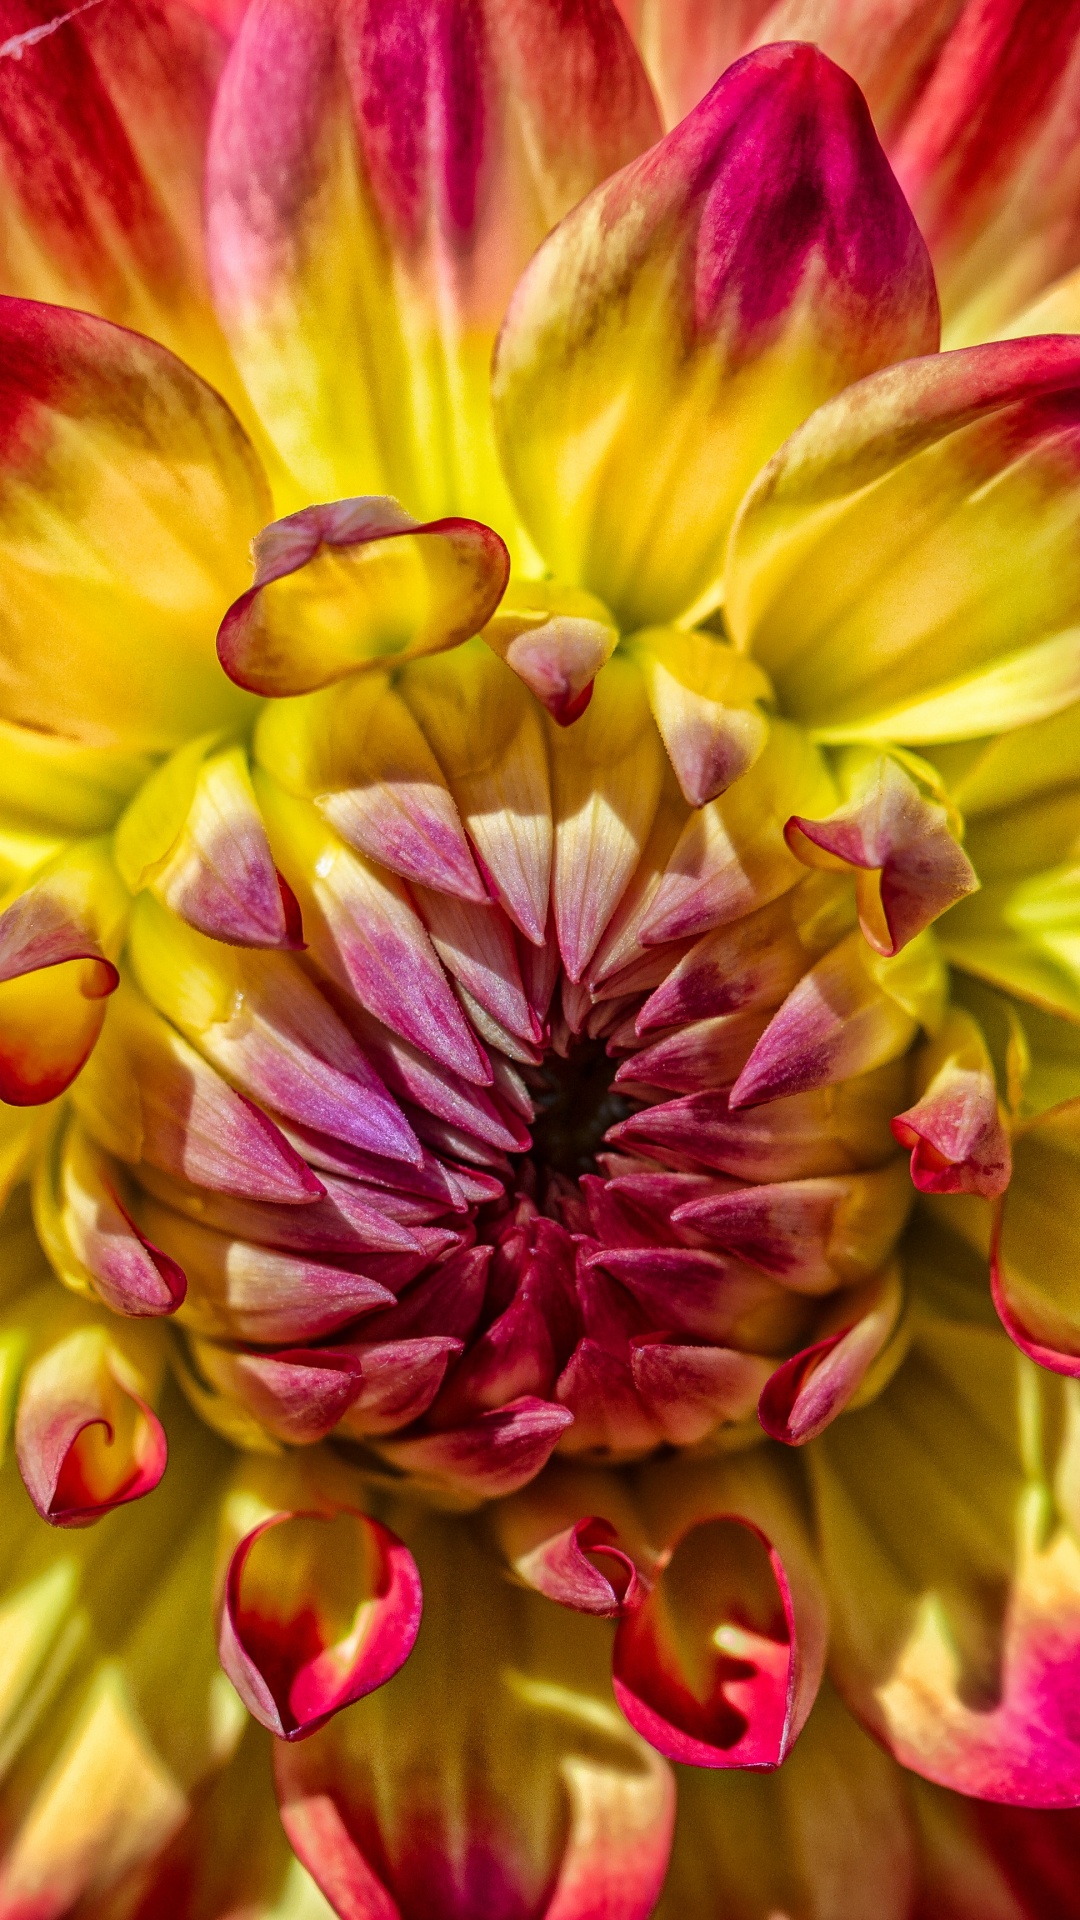 Pink and Yellow Flower in Macro Photography. Wallpaper in 1080x1920 Resolution